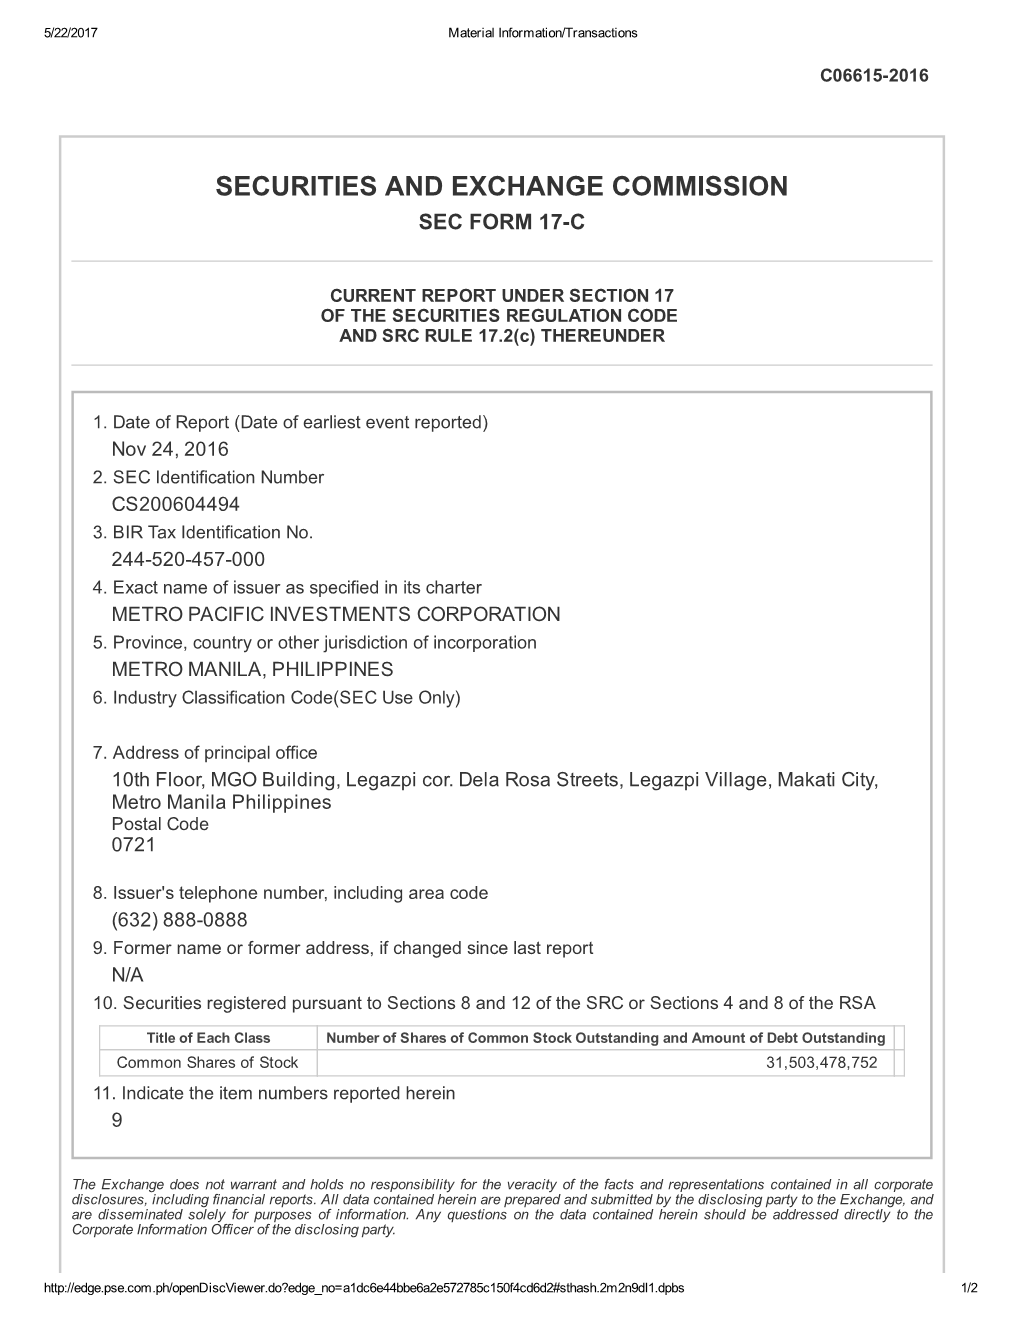 Securities and Exchange Commission Sec Form 17­C